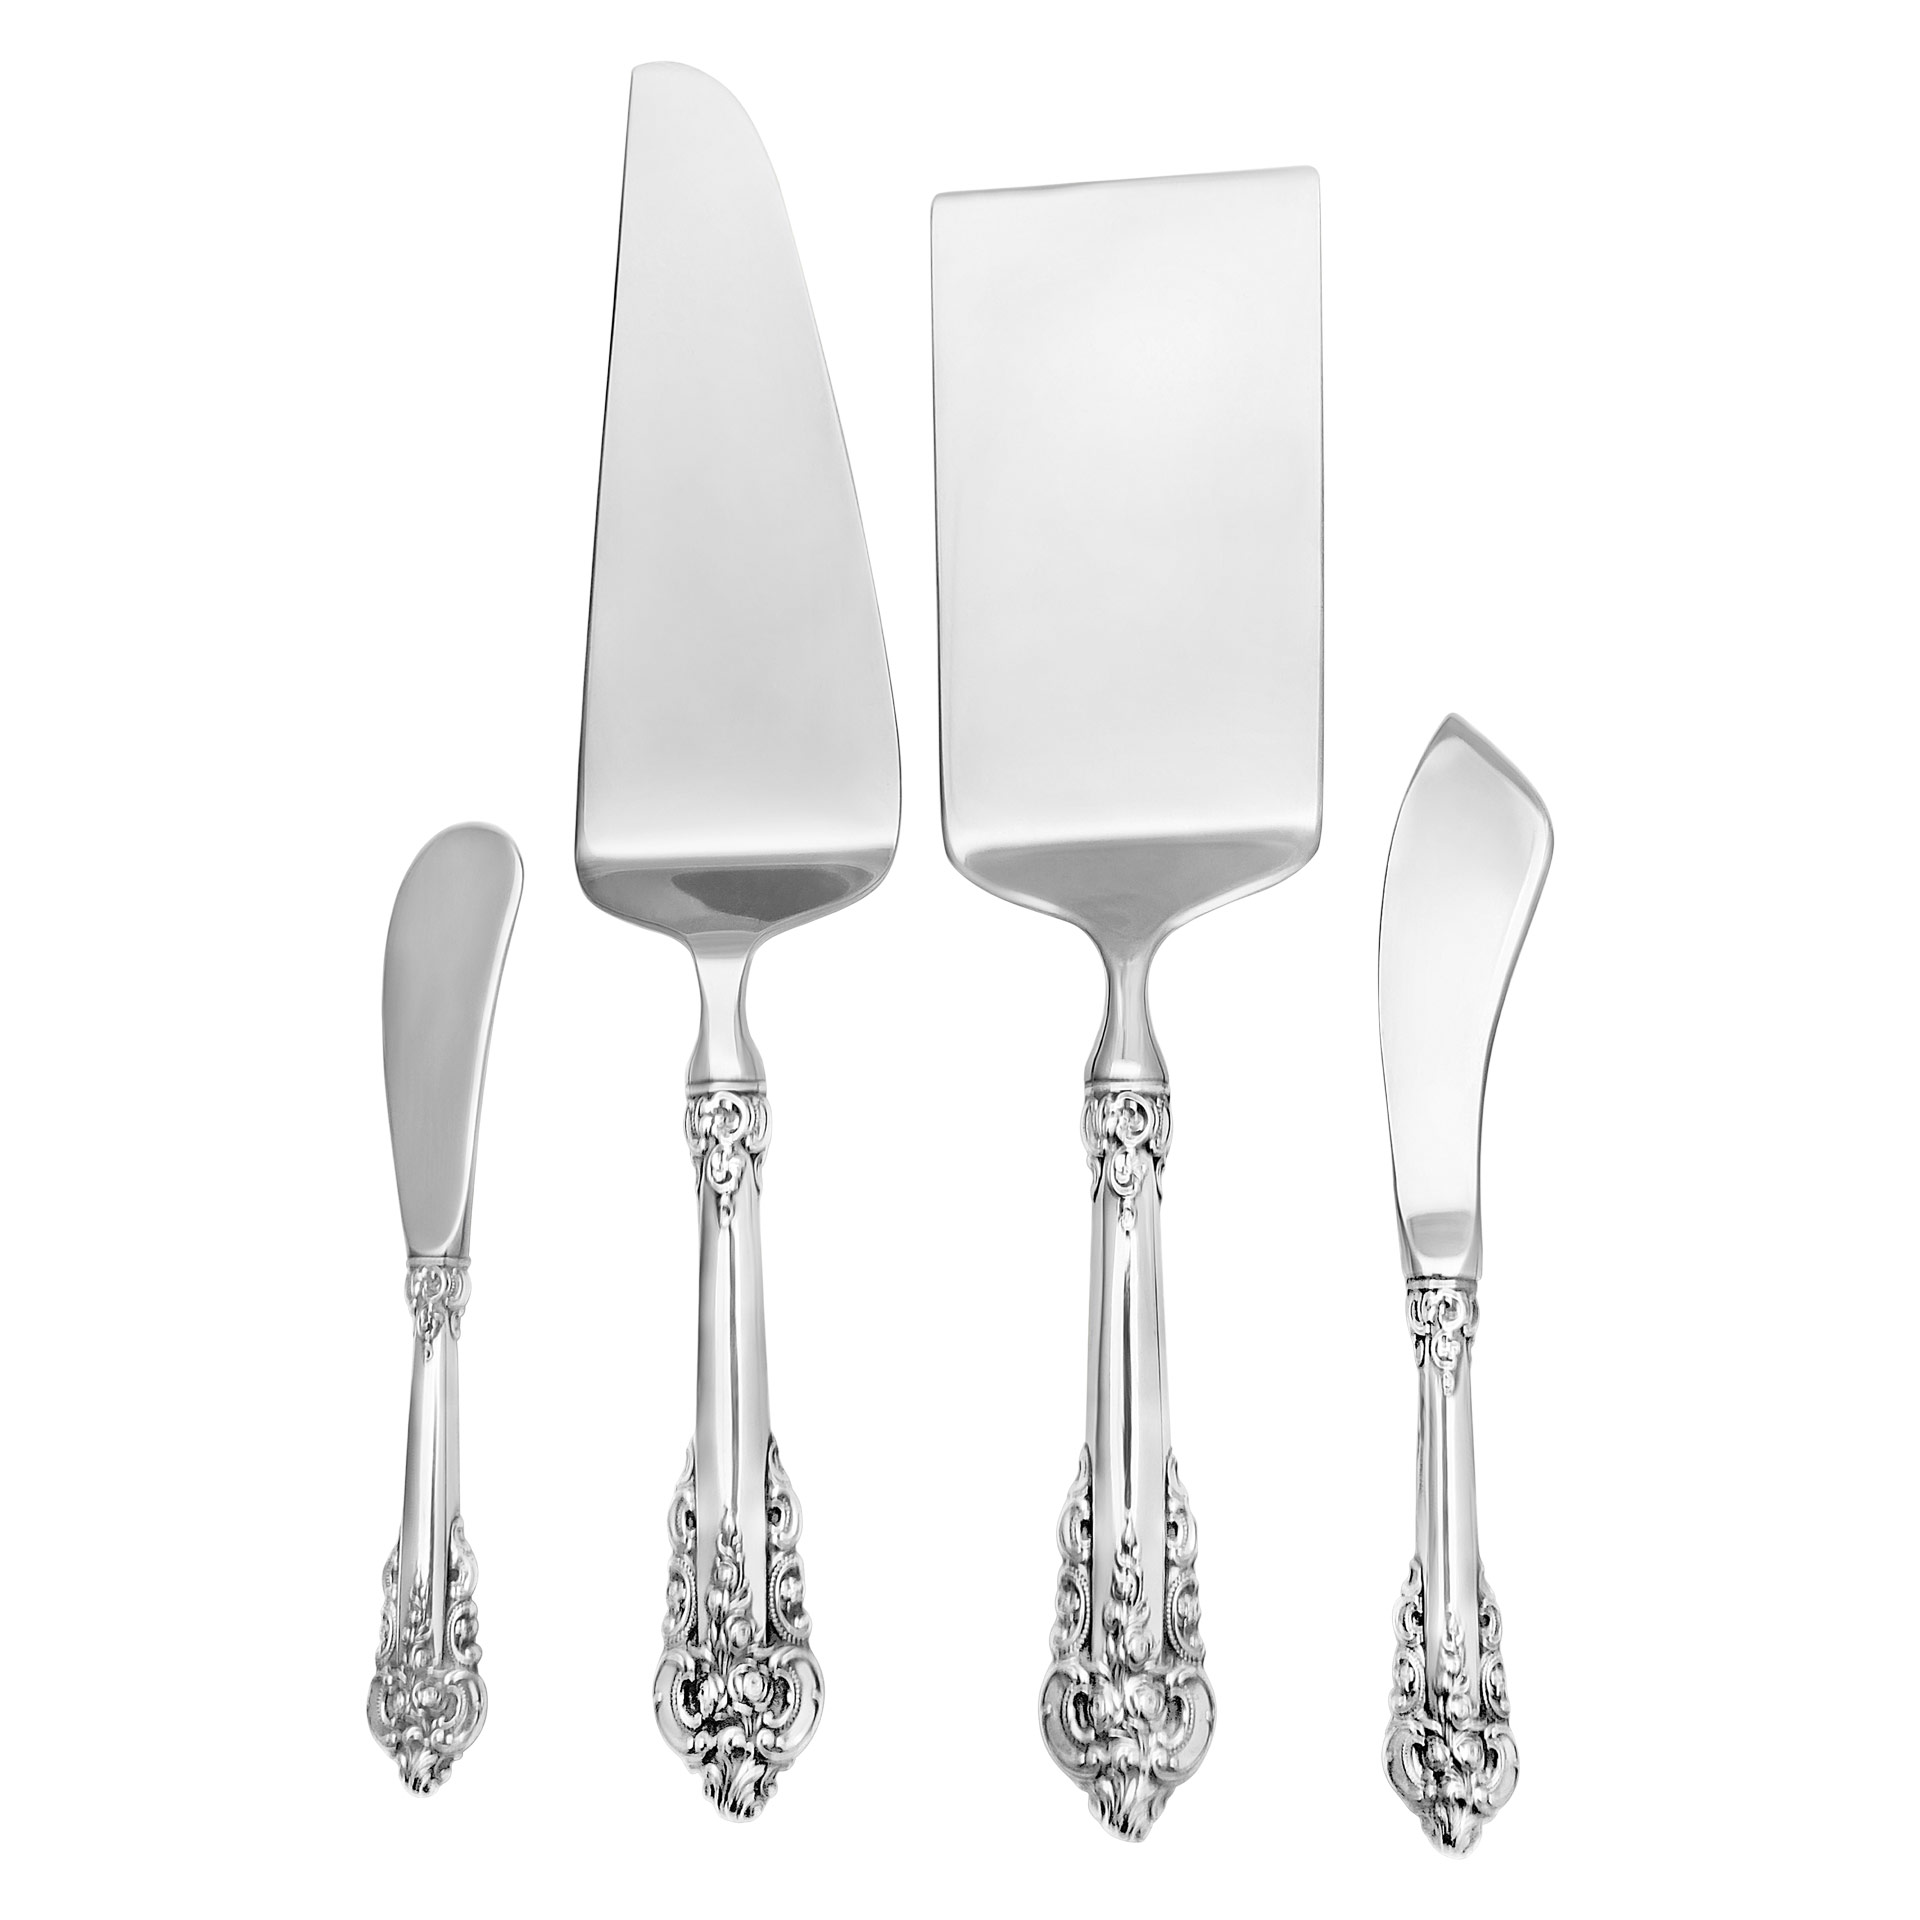 "GRANDE BAROQUE" Sterling Silver Flatware Set. Ptd 1941 by Wallace. 7 place setting for 12 with 8 serving pieces. Over 3500 grams sterling silver. image 2